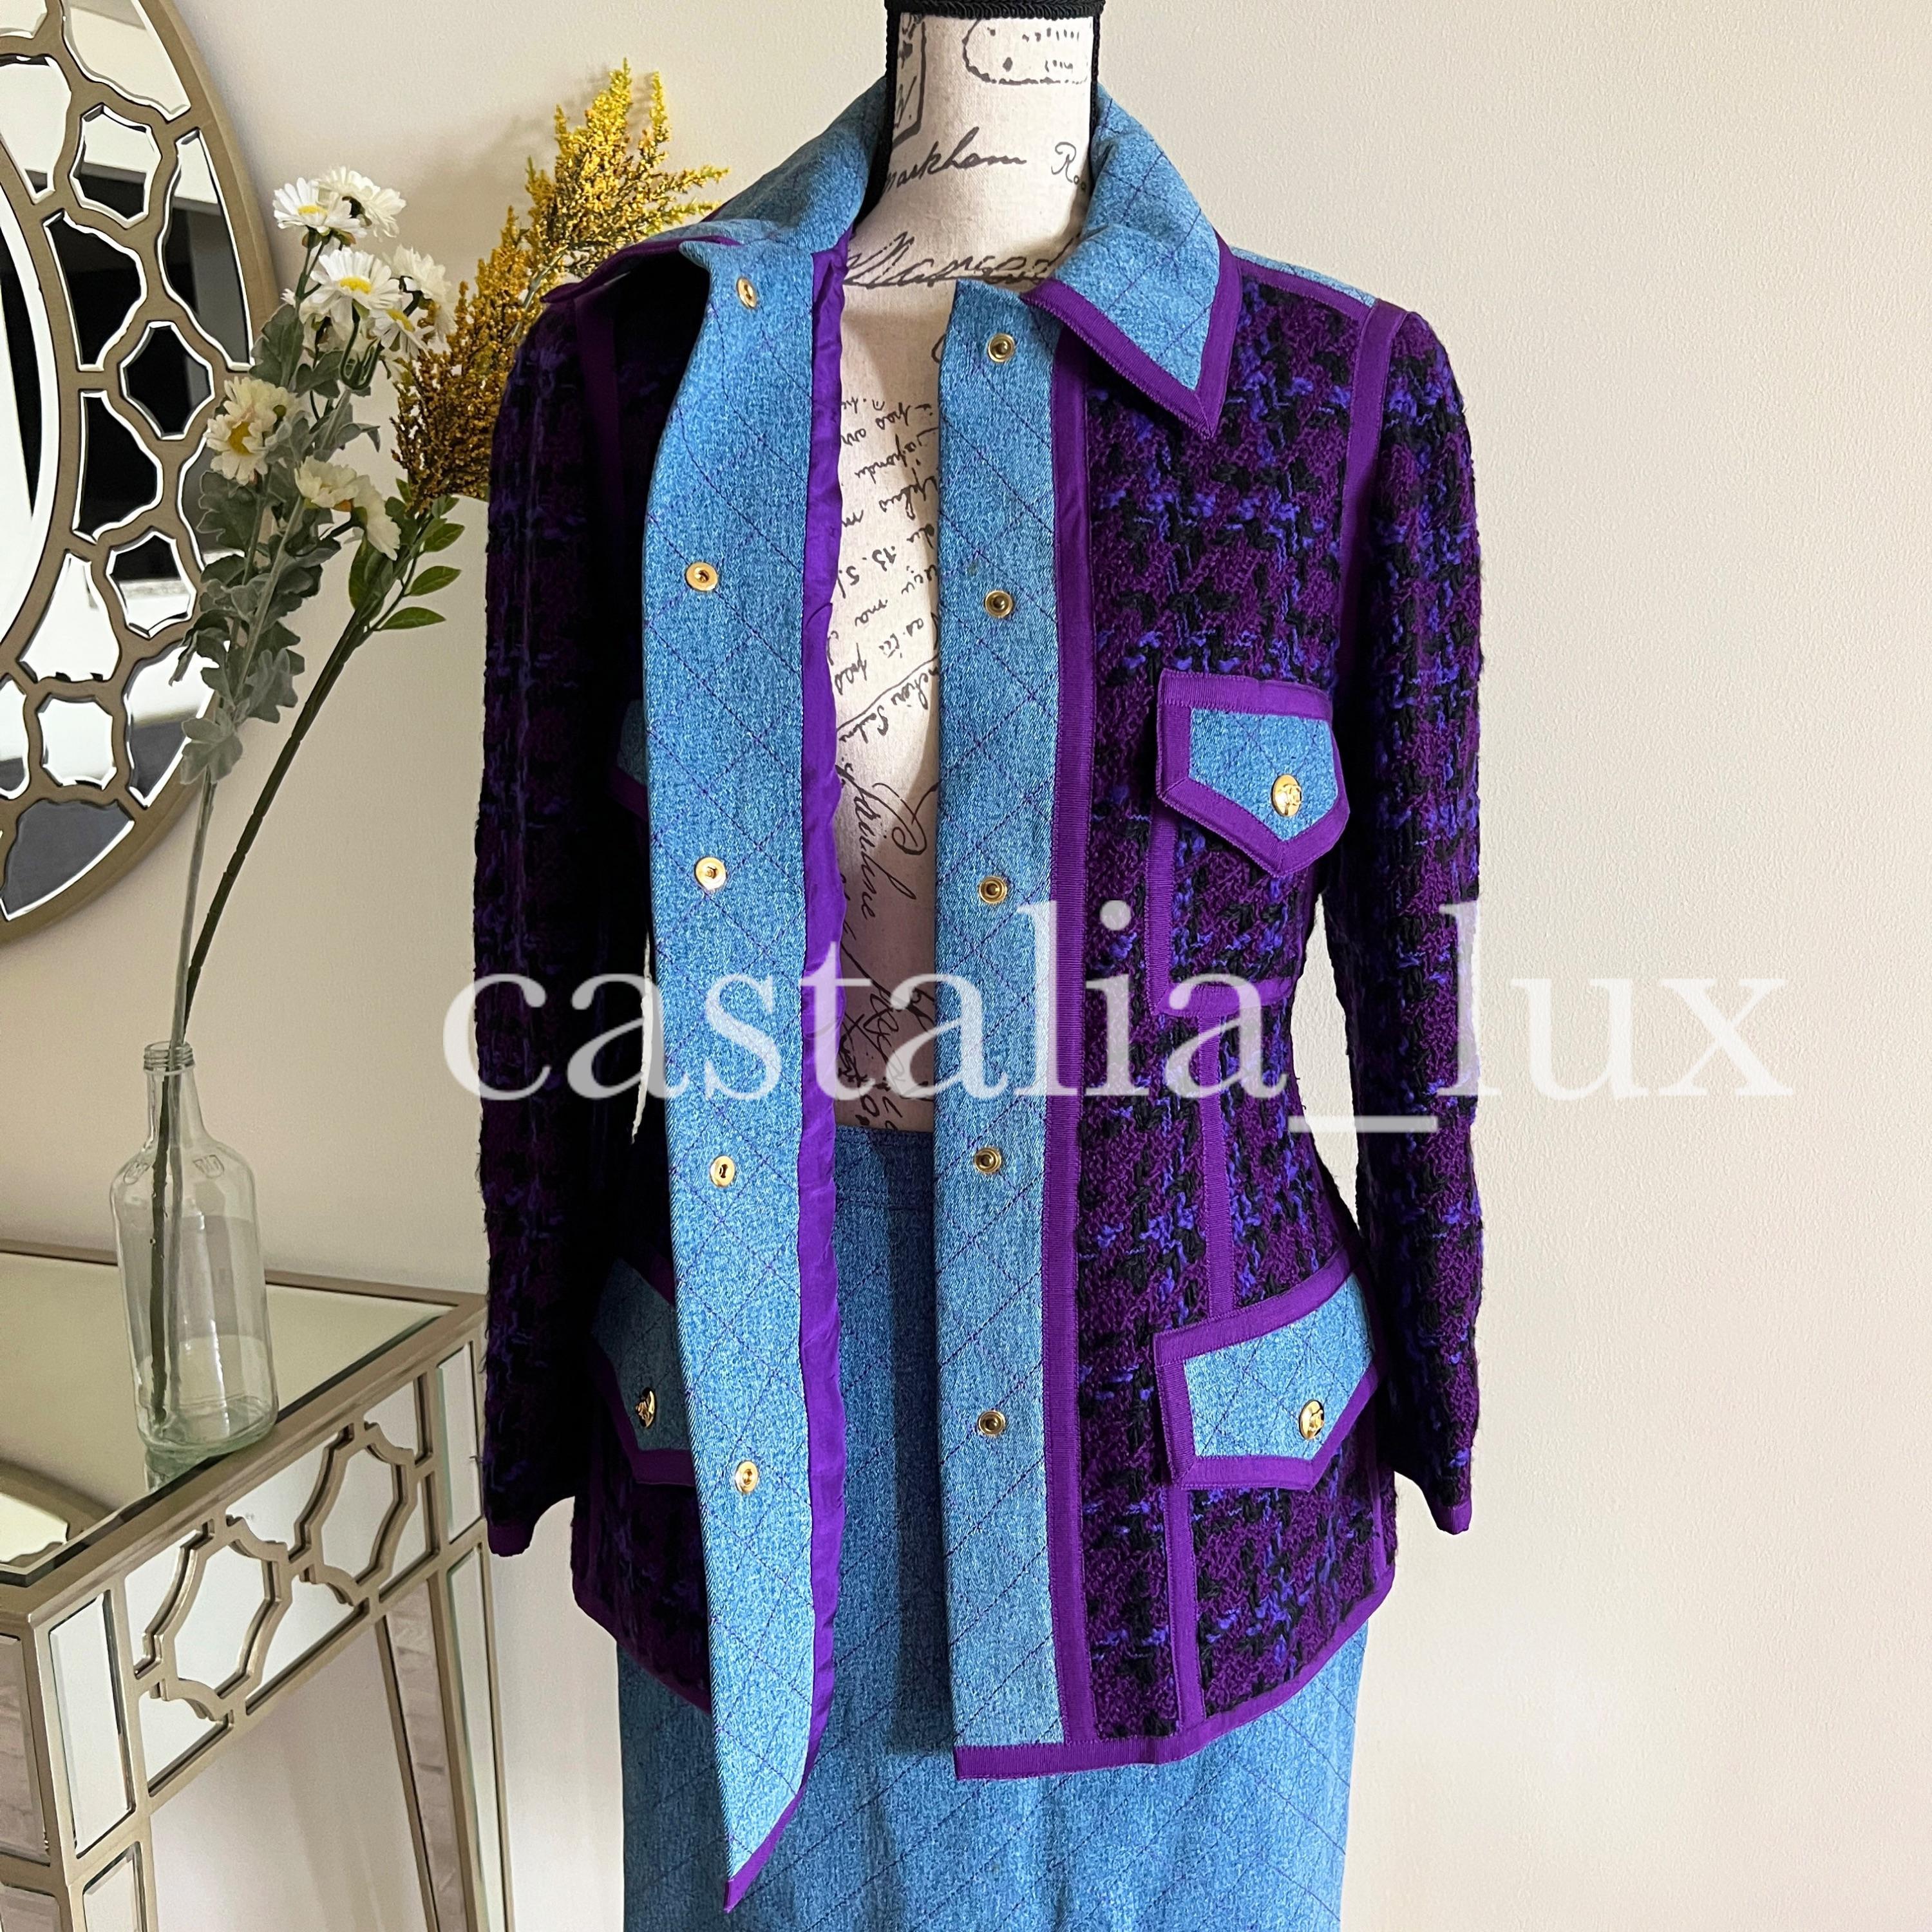 Chanel Rare 1991 Supermodels Tweed and Denim Suit For Sale 5